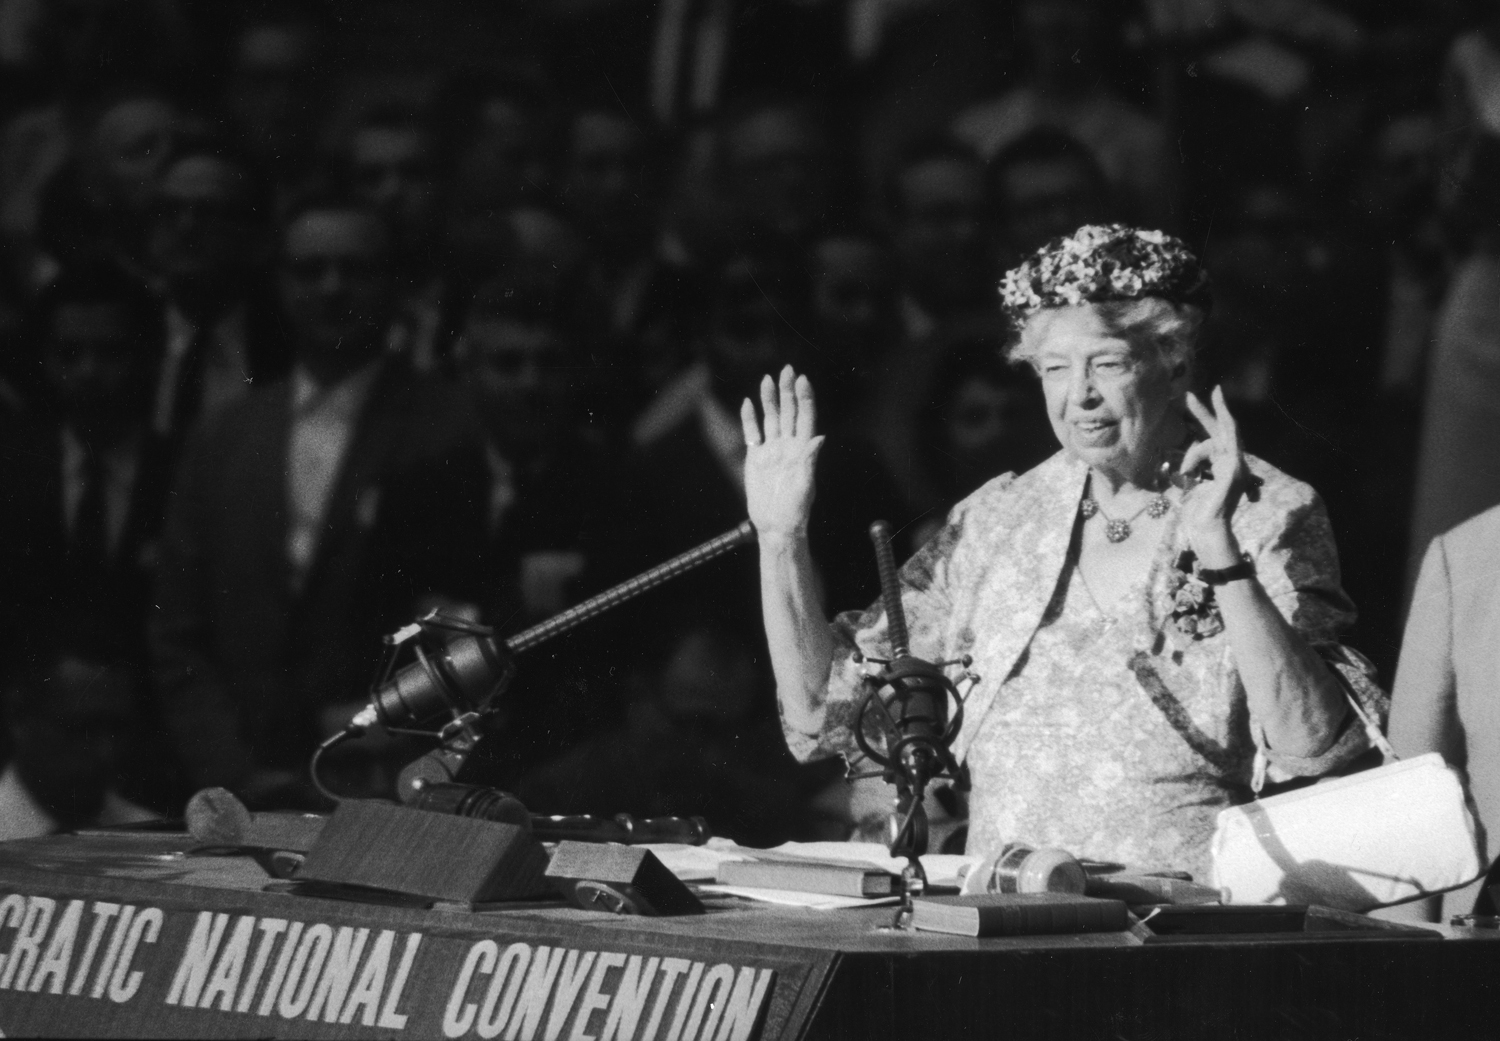 Eleanor Roosevelt addresses delegates at the 1960 Democratic National Convention in Los Angeles, where she supported Illinois' Adlai Stevenson over the party's eventual nominee, John F. Kennedy.